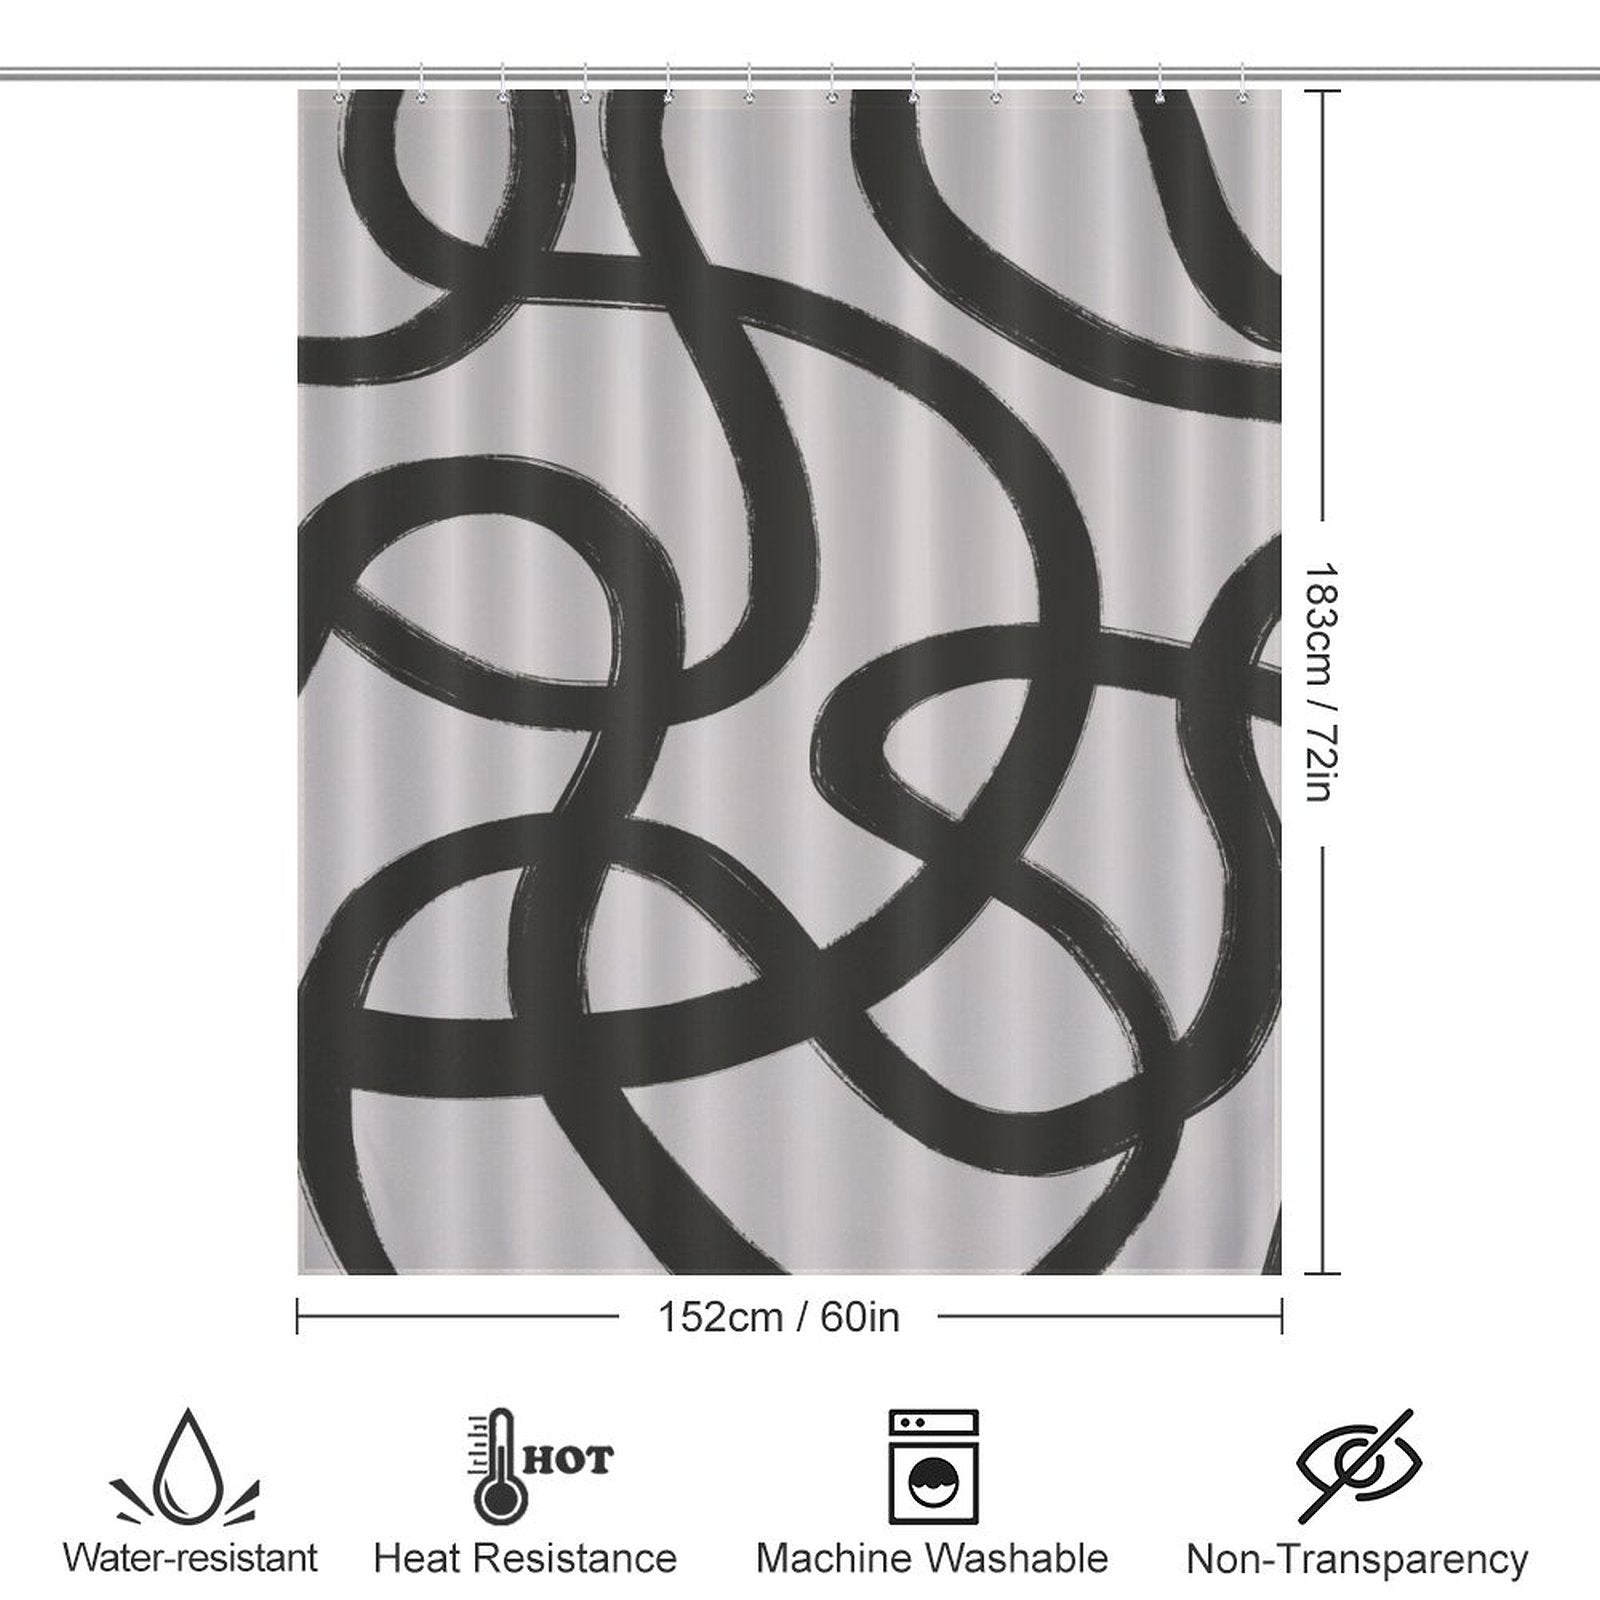 A white shower curtain with black abstract swirls, measuring 152 cm by 183 cm. This Modern Geometric Art Minimalist Curve Black Line Black and Grey Abstract Shower Curtain-Cottoncat is water-resistant, heat-resistant, machine washable, and non-transparent.